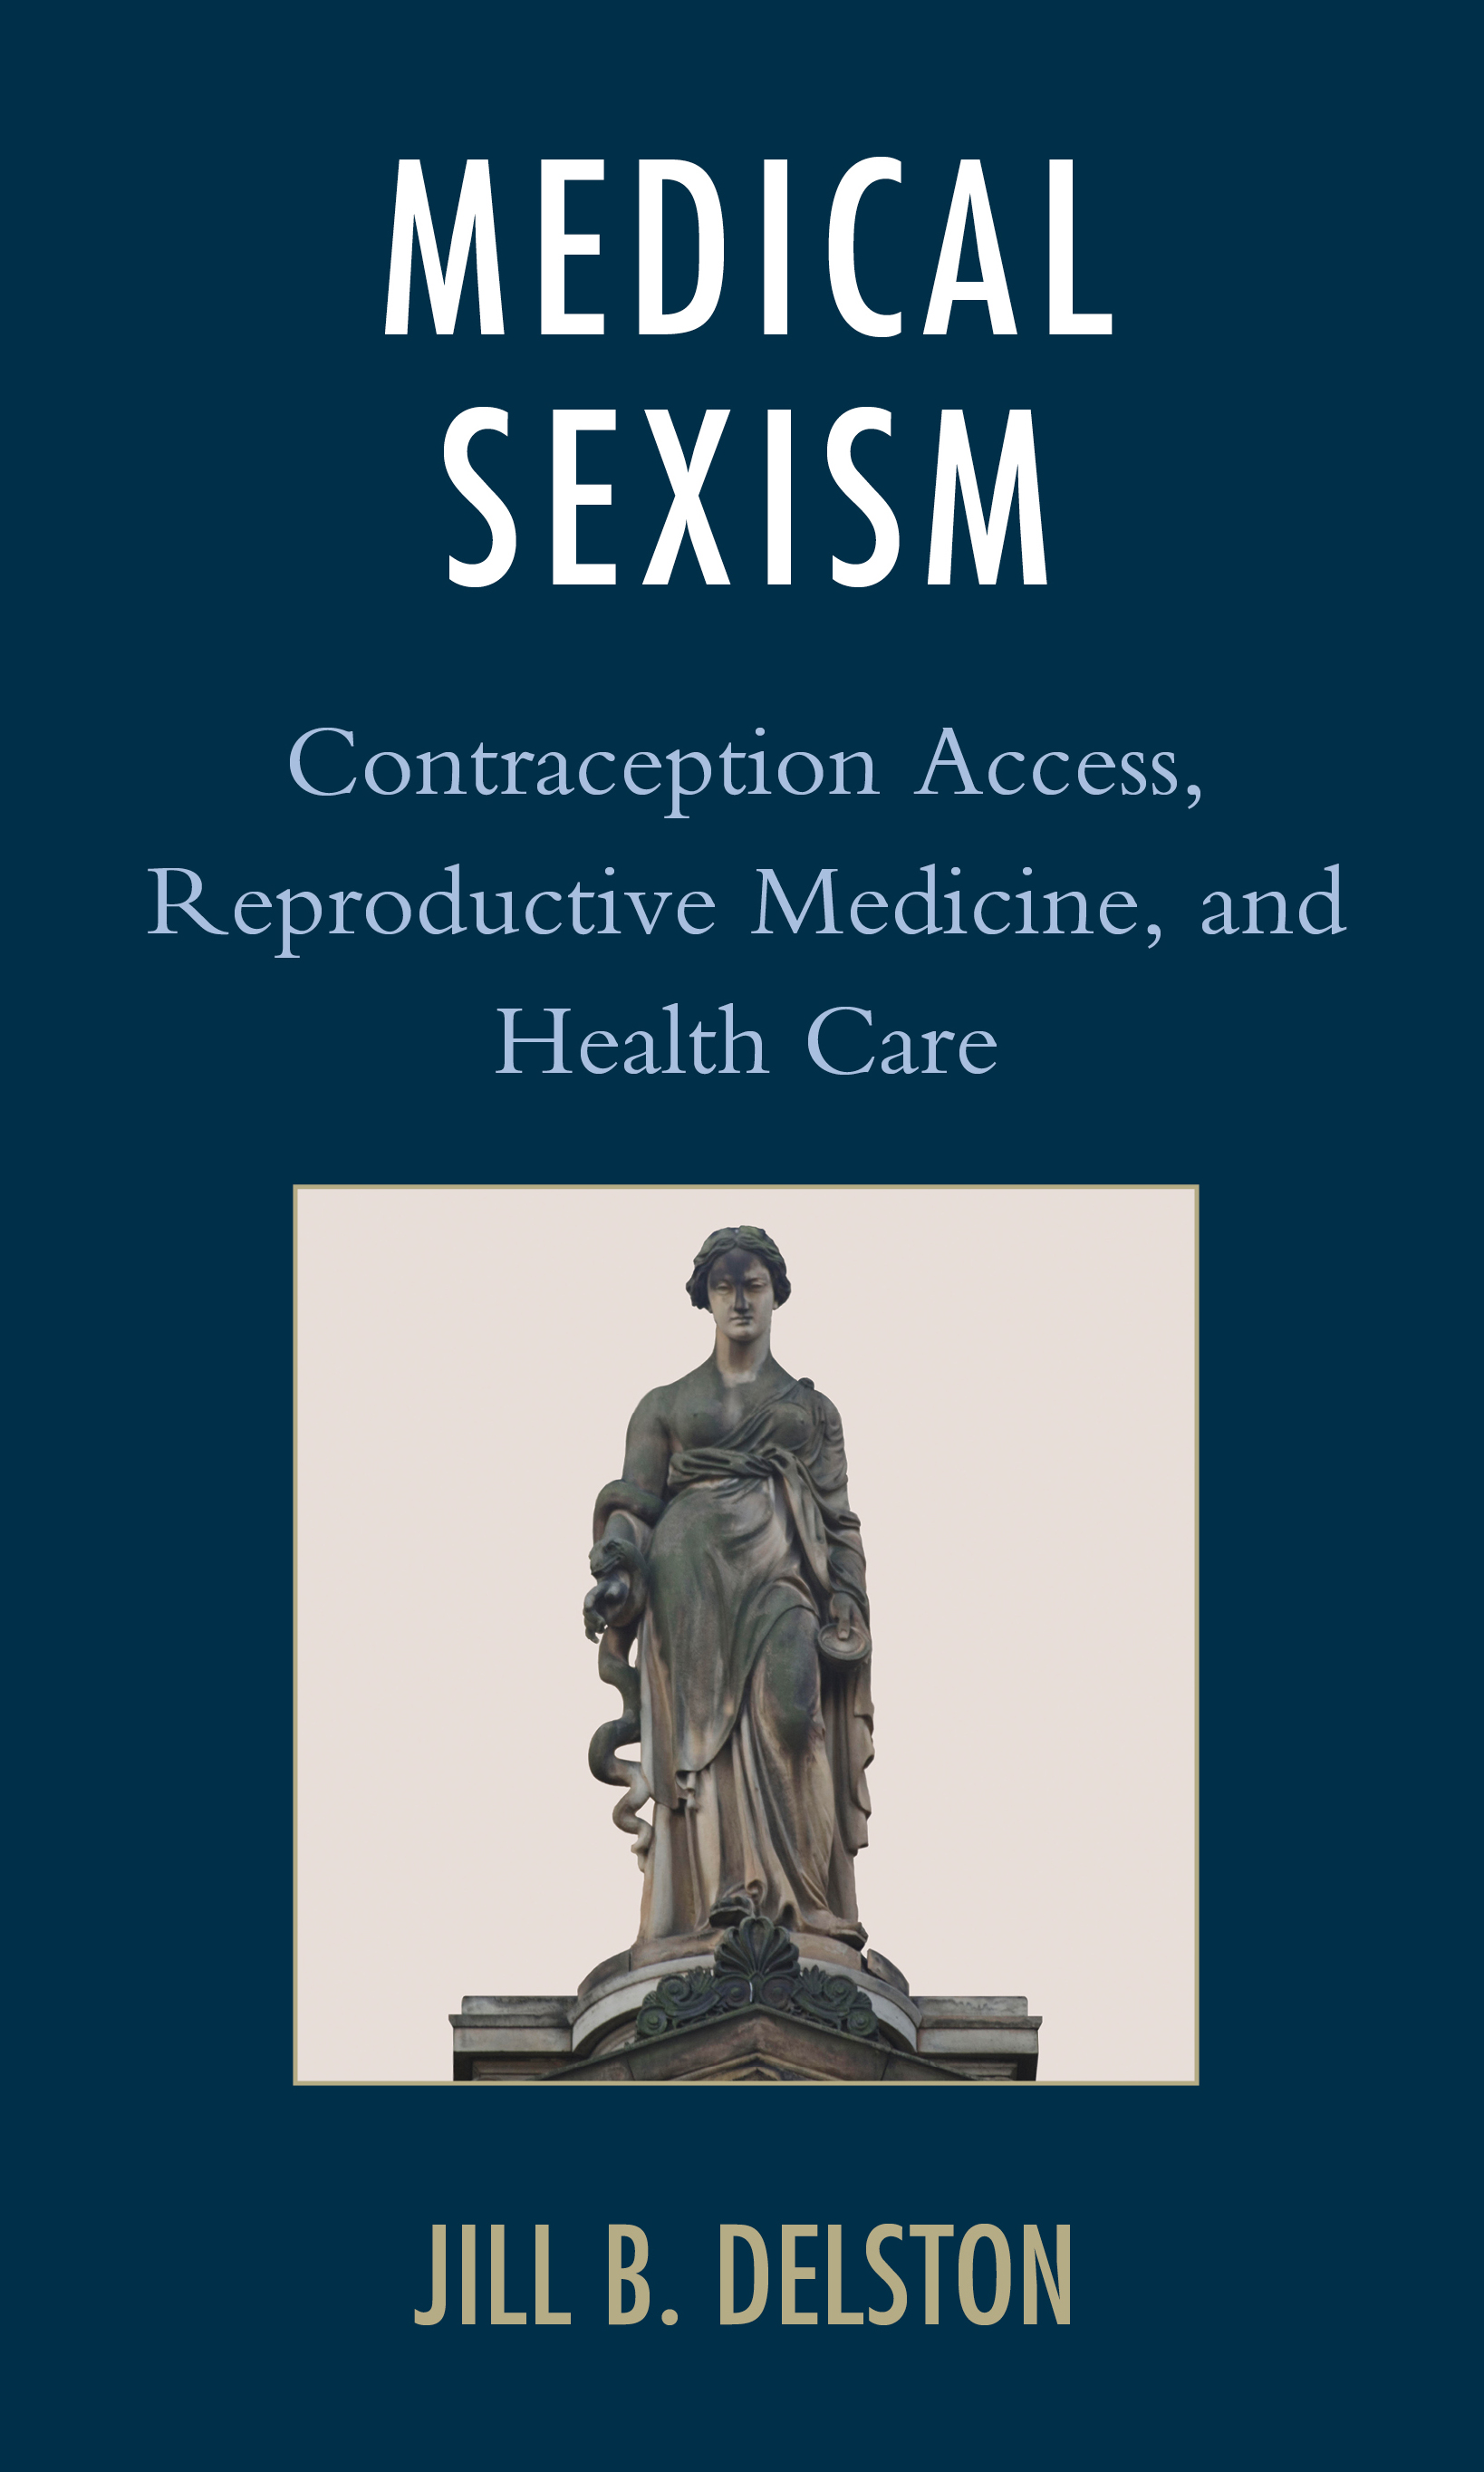 Medical Sexism: Contraception Access, Reproductive Medicine, and Health Care